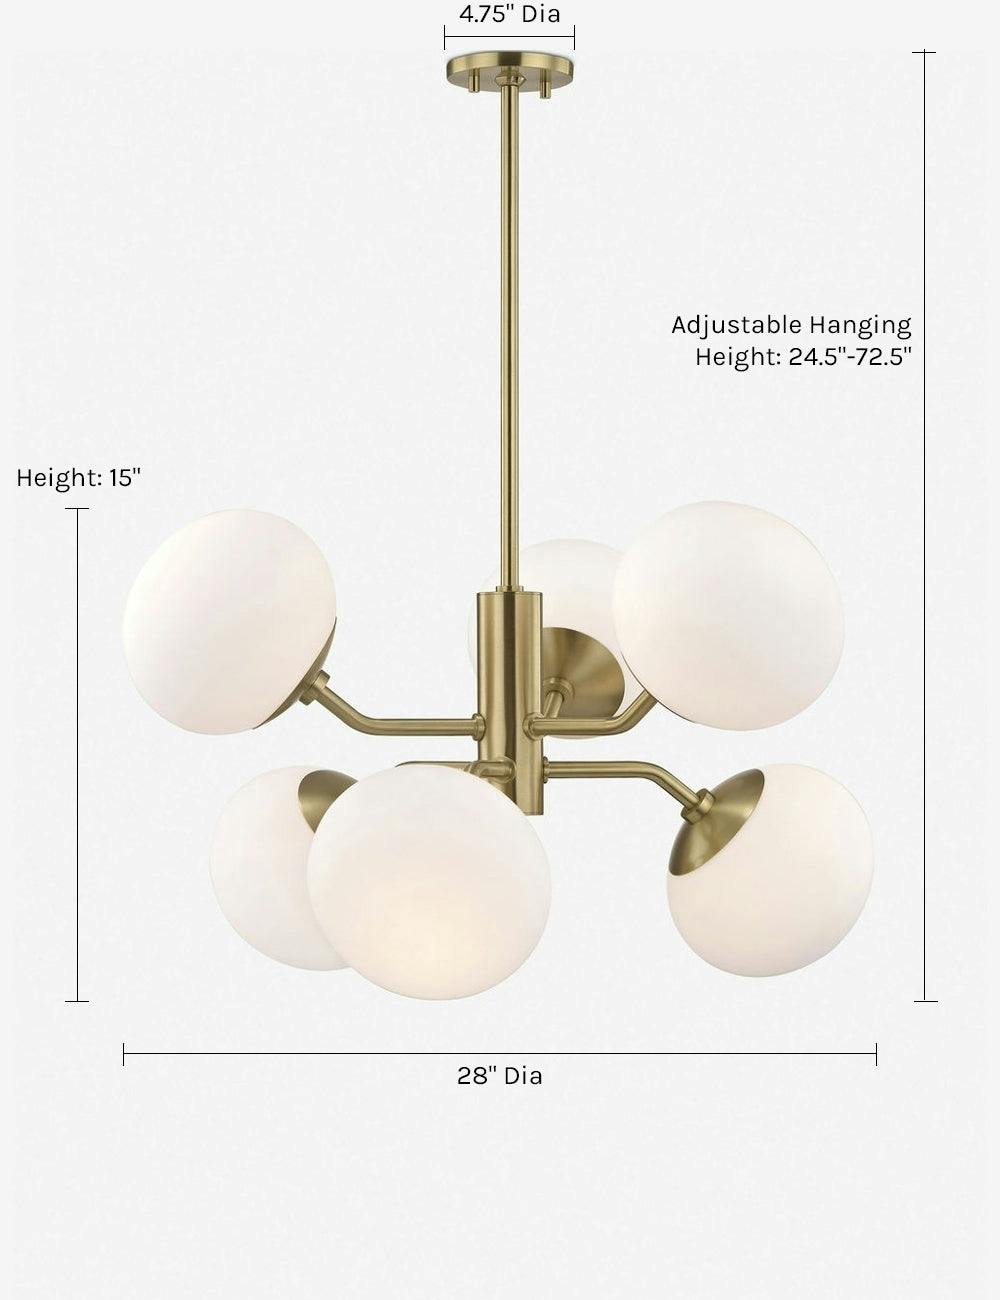 Ainsley Transitional Globe Chandelier in Aged Brass with Frosted Glass